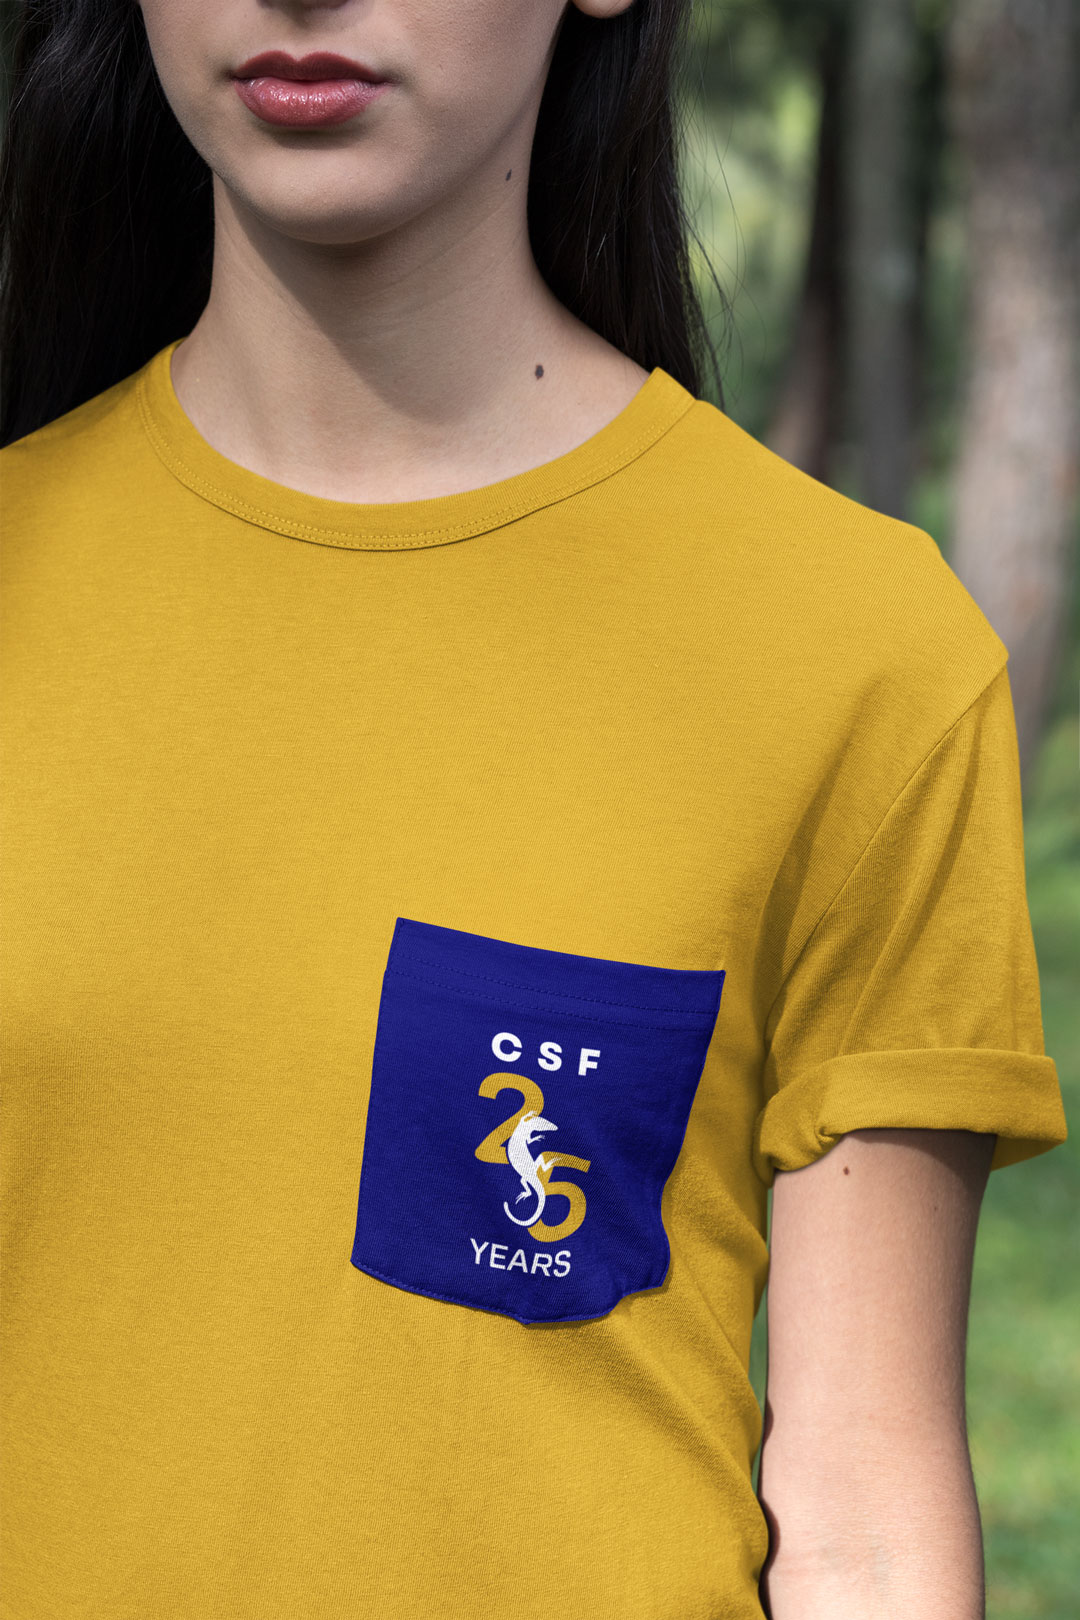 pocket-tee-mockup-of-a-woman-in-nature-30081